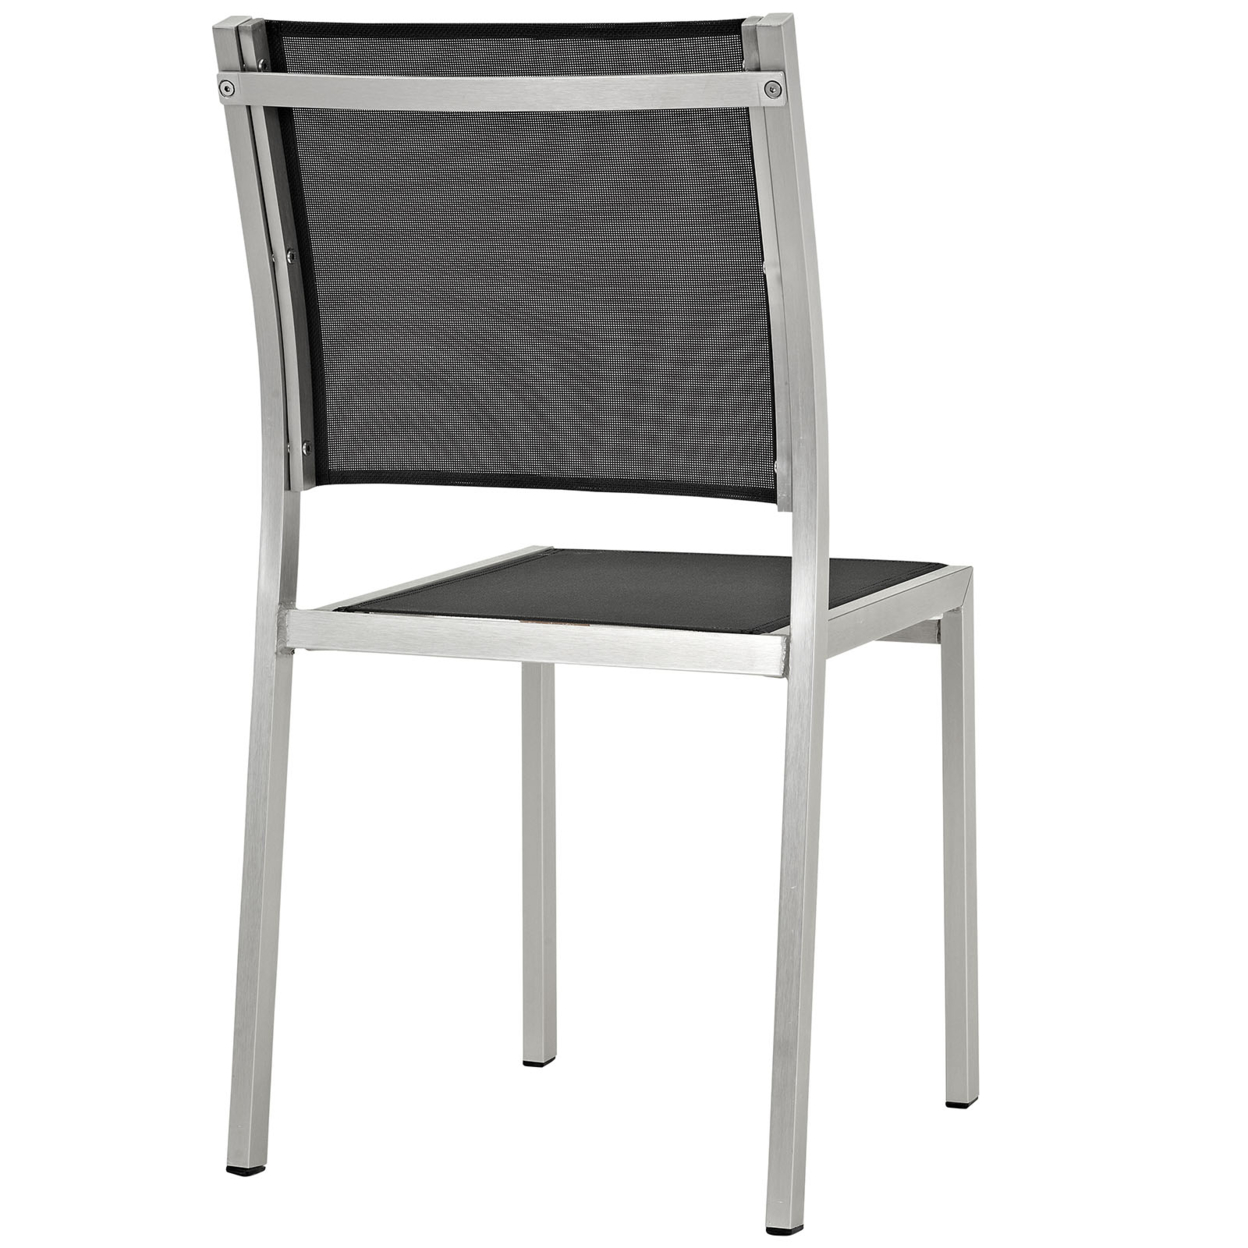 Silver Black Shore Outdoor Patio Aluminum Side Chair - image 3 of 4